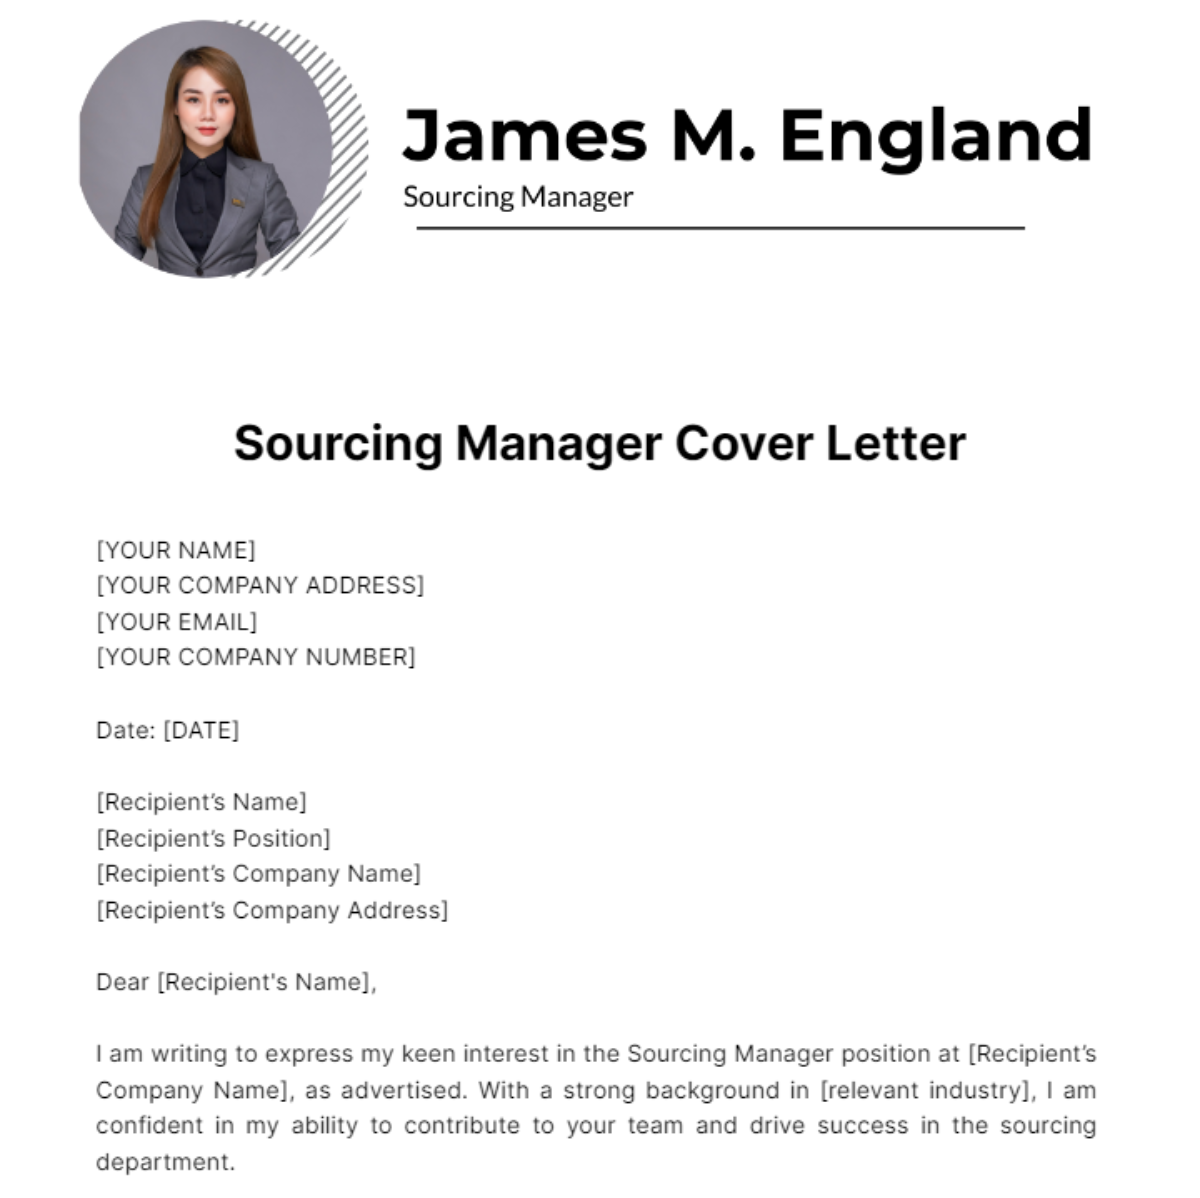 Sourcing Manager Cover Letter Template